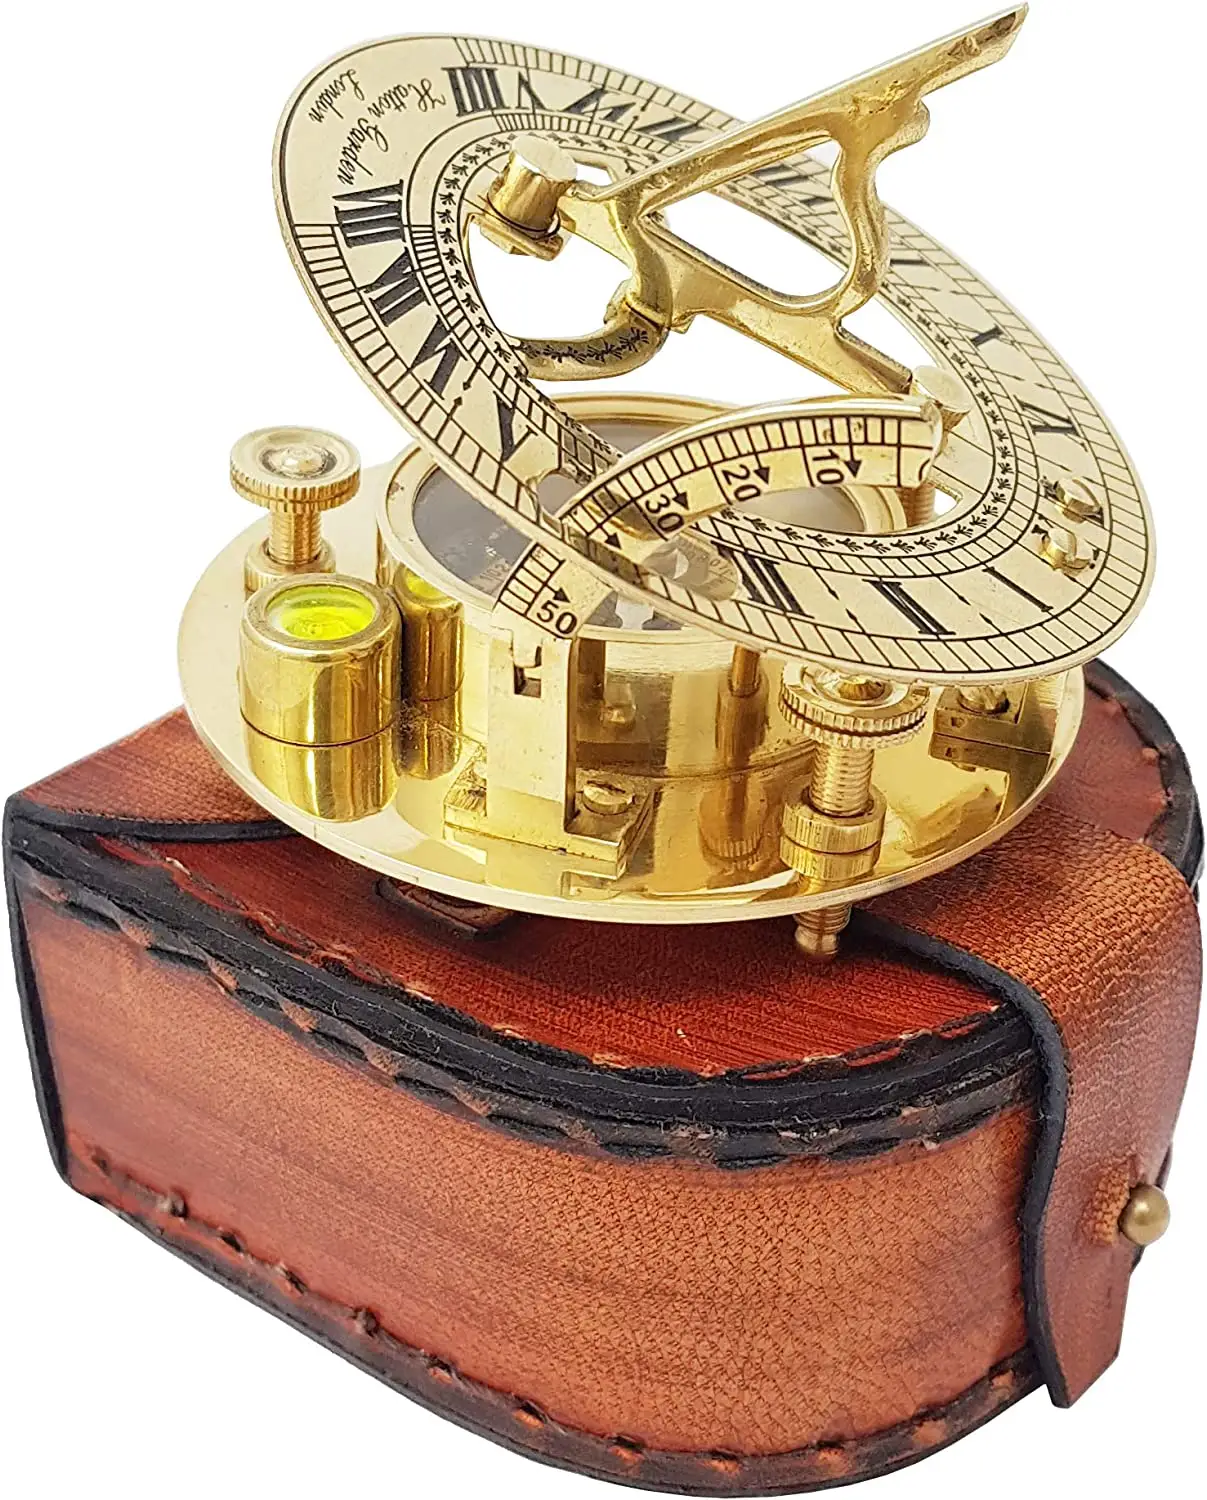 Wholesale High Quality Antique Vintage Brass Marine Sundial Compass with Premium Lather Case .